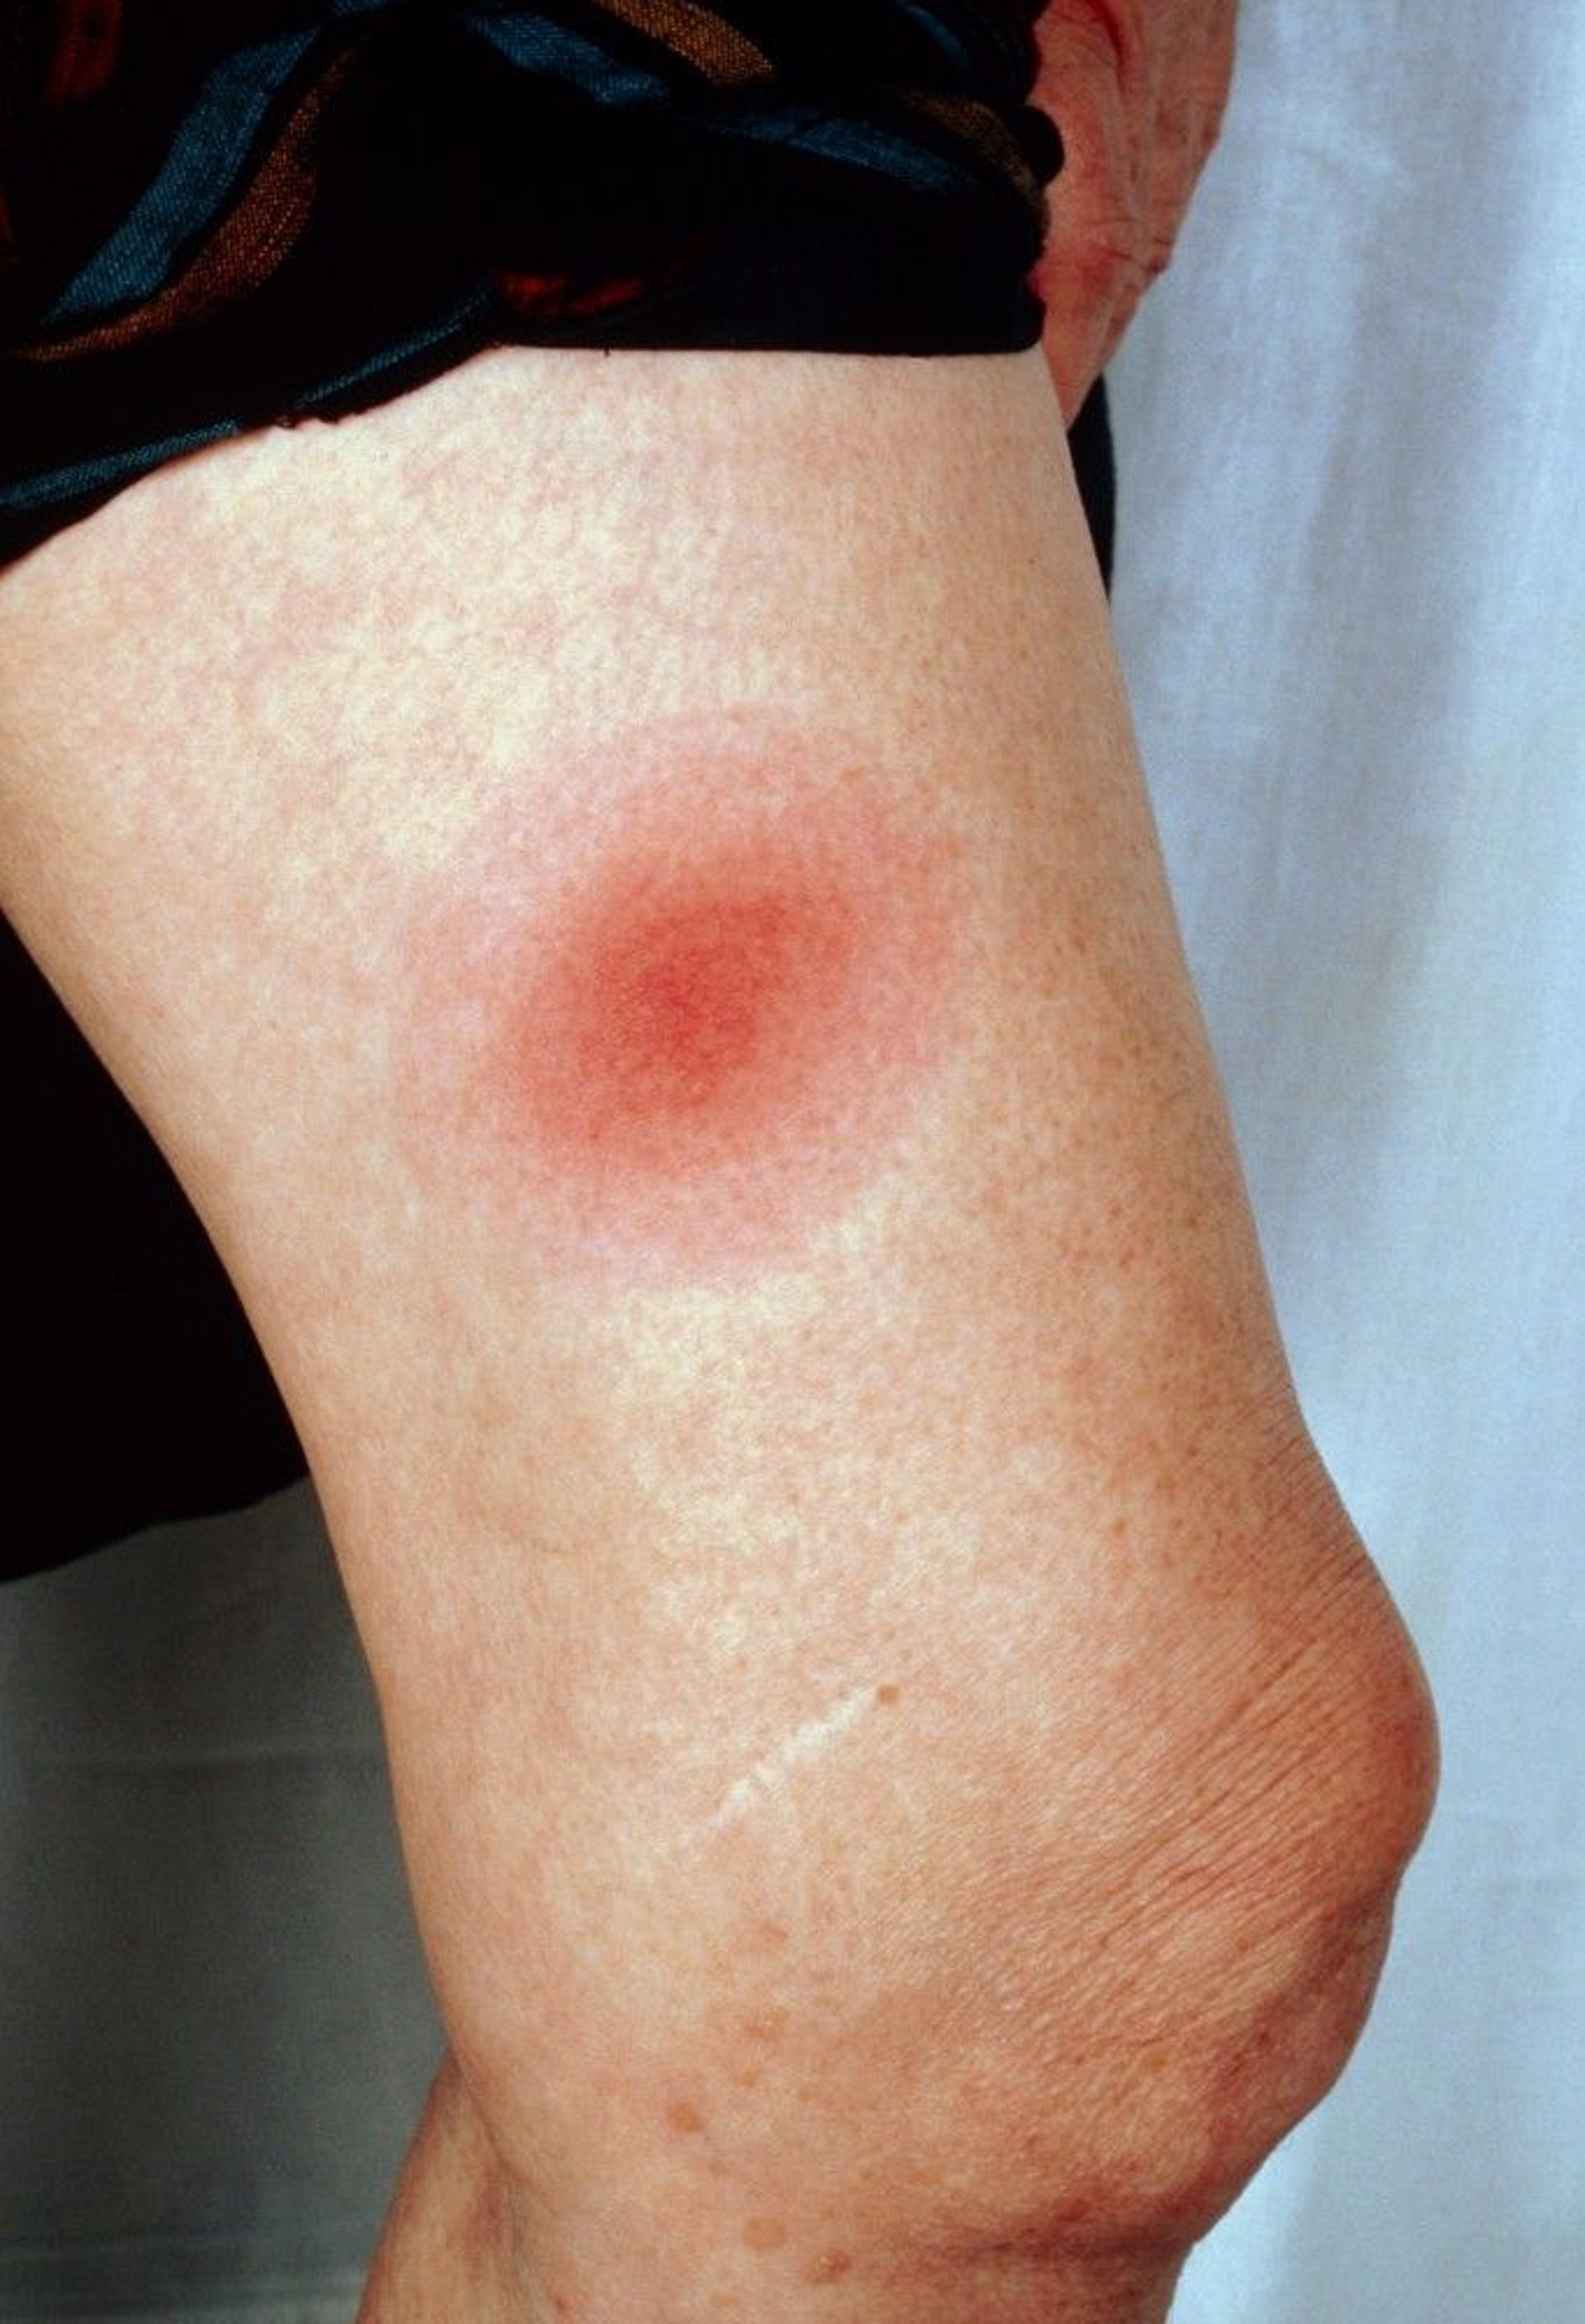 A Variation of the Rash of Lyme Disease (Erythema Migrans)